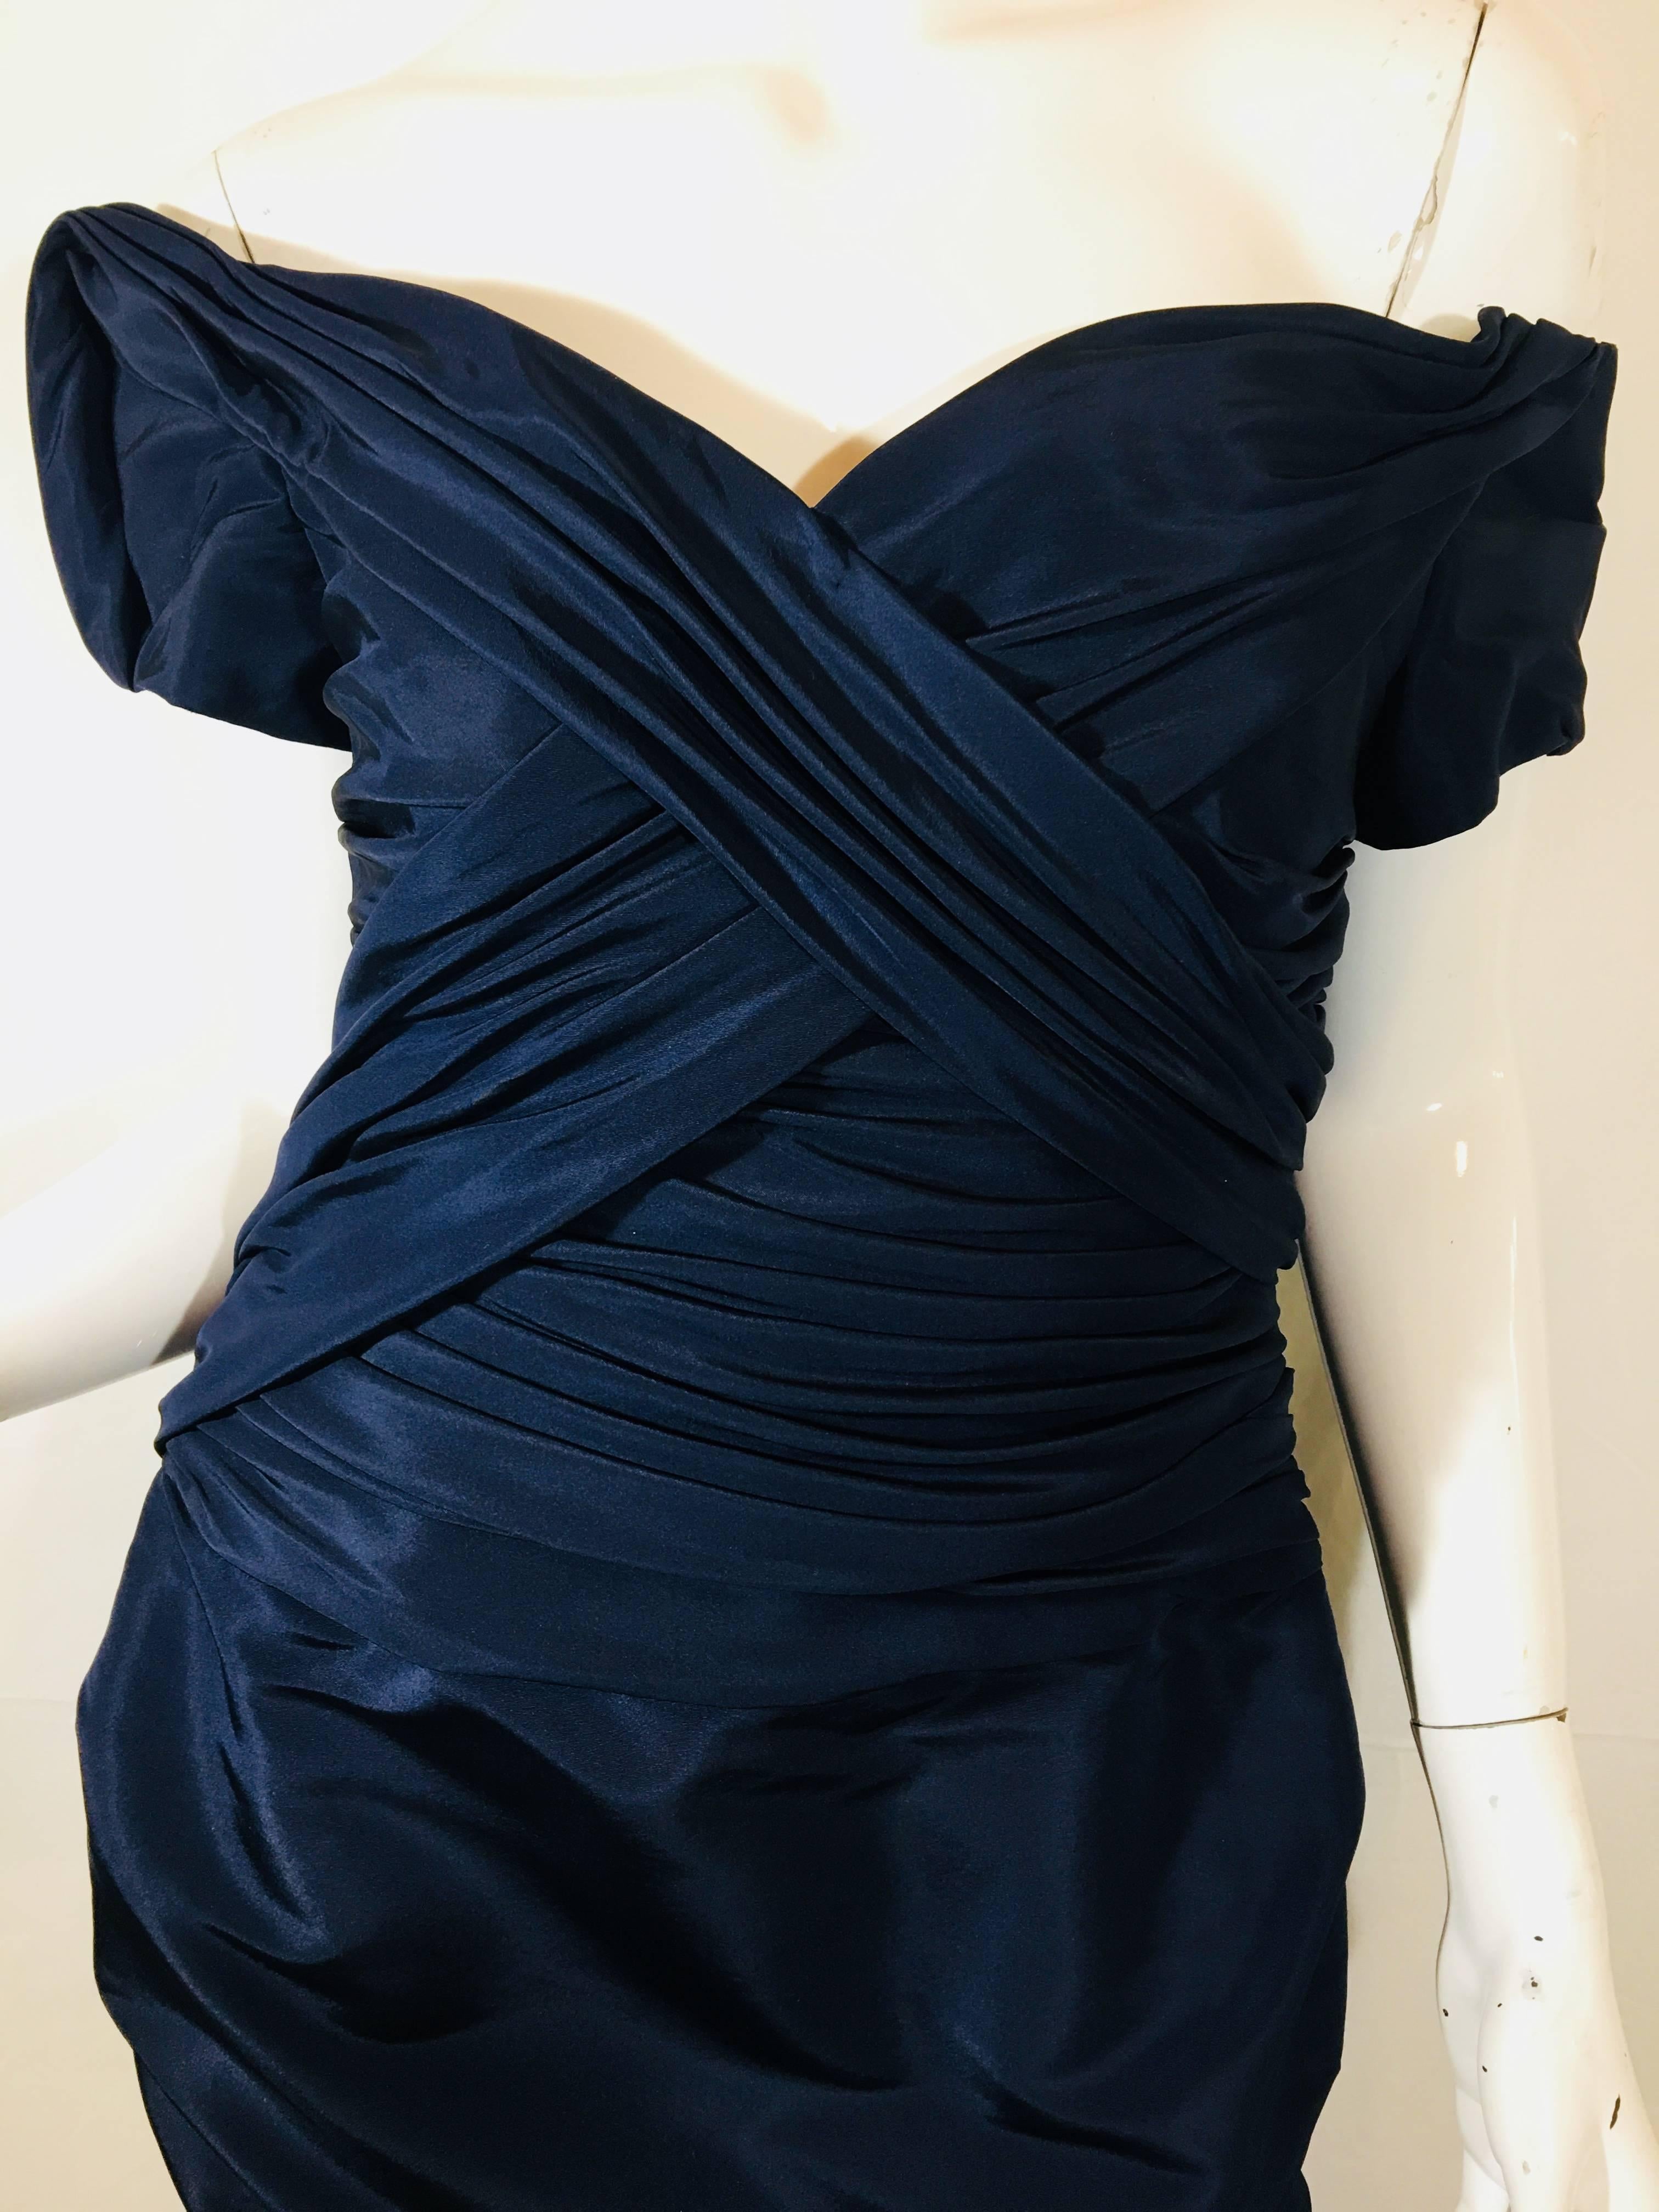 Carolina Herrera Off the Shoulder Dress in Navy Blue Silk with Ruched Bodice and Back Zipper.